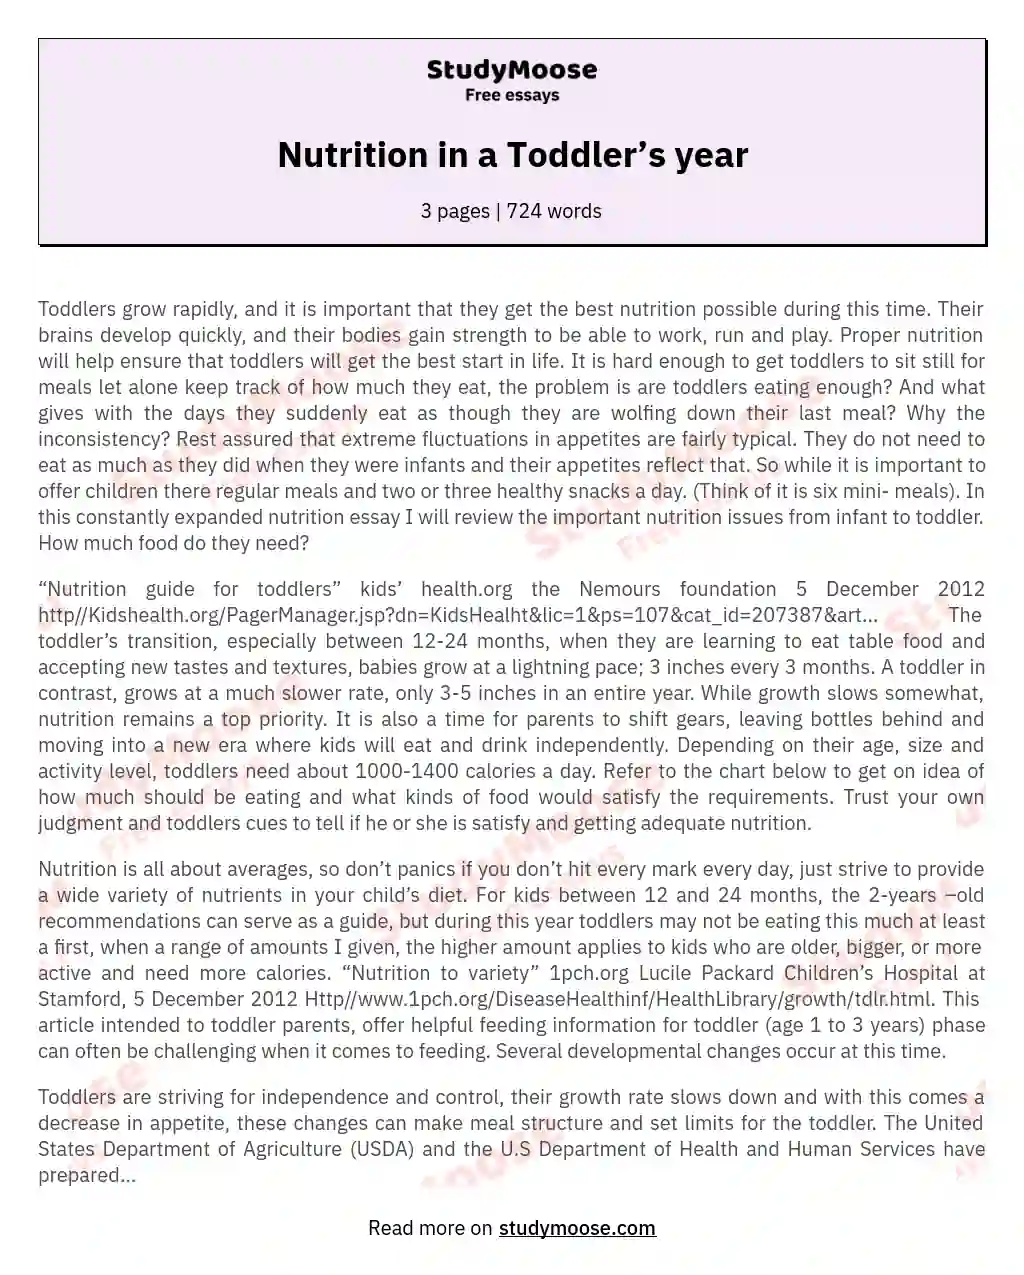 Nutrition in a Toddler’s year essay